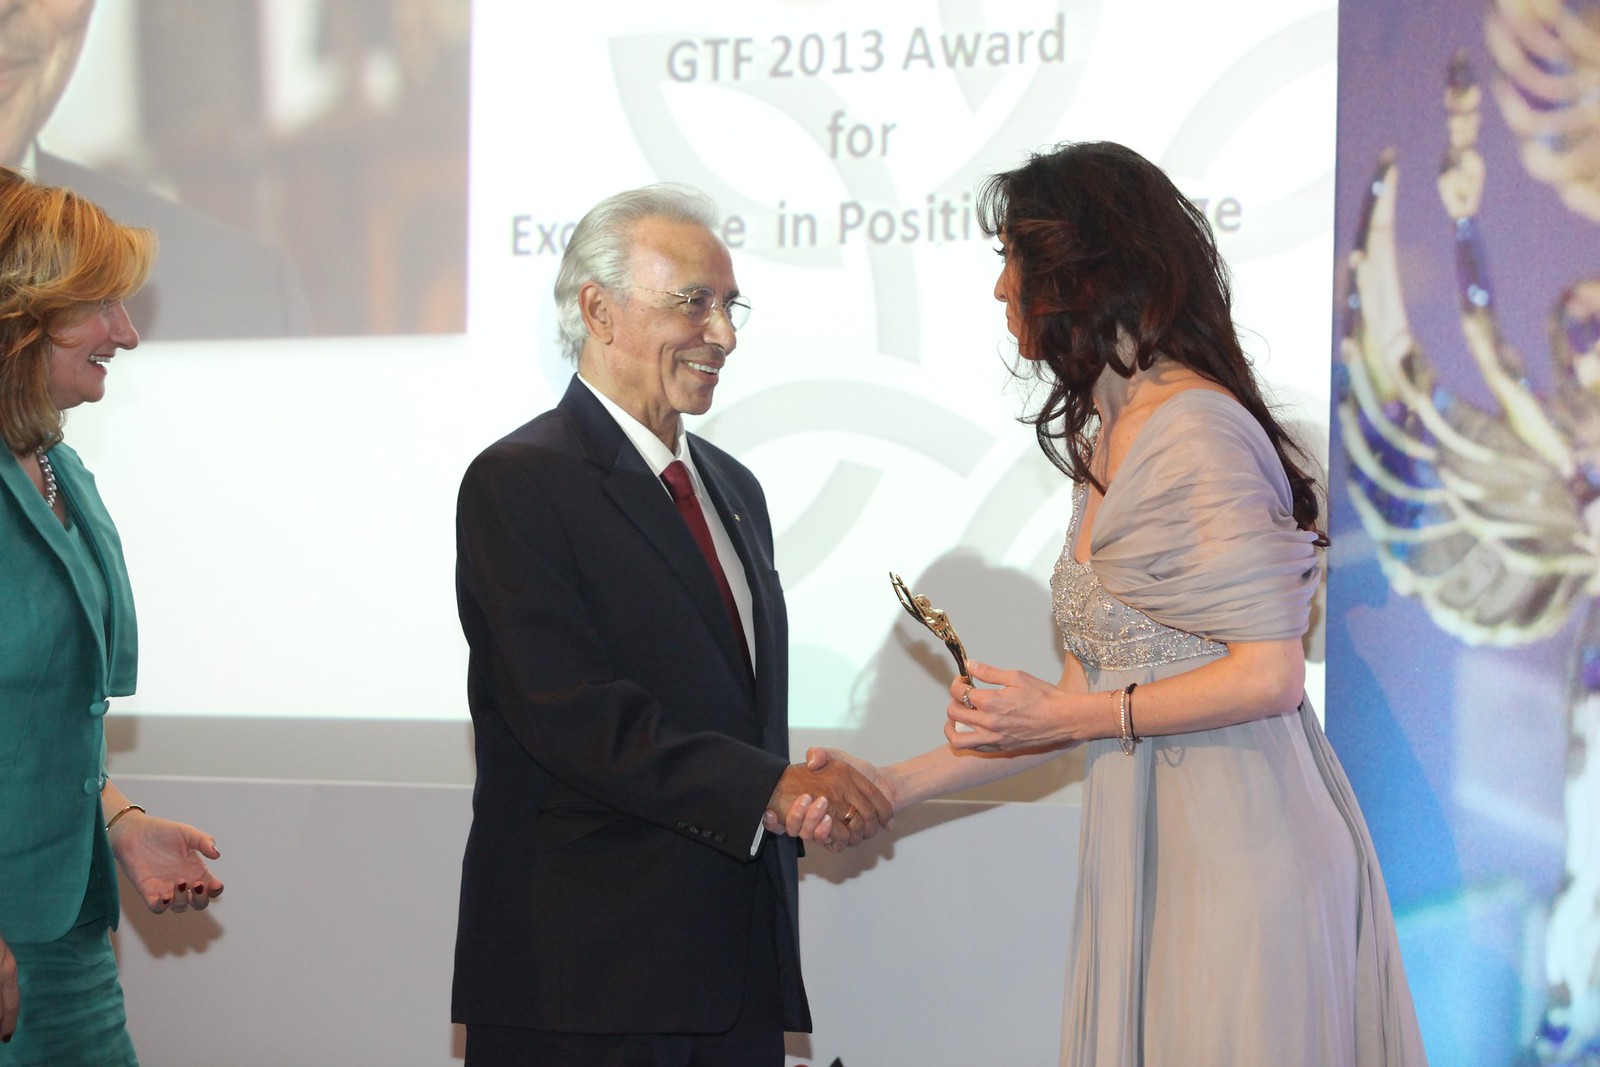 Dr Ibrahim Abouleish, GTF 2013 Award for Excellence in Positive Change